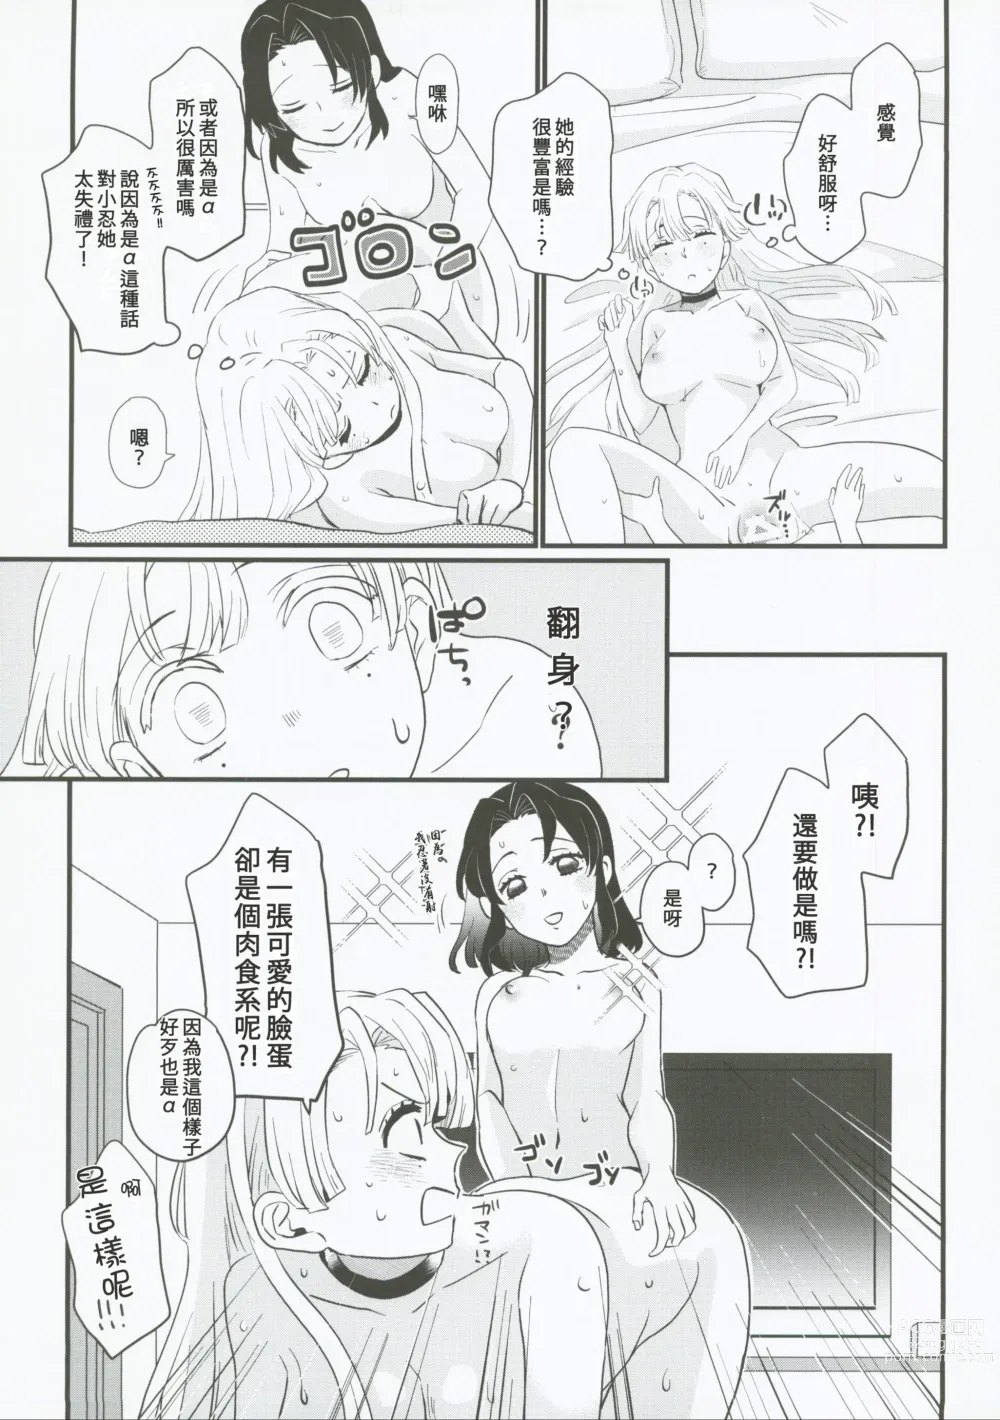 Page 38 of doujinshi 屬於妳的Omega